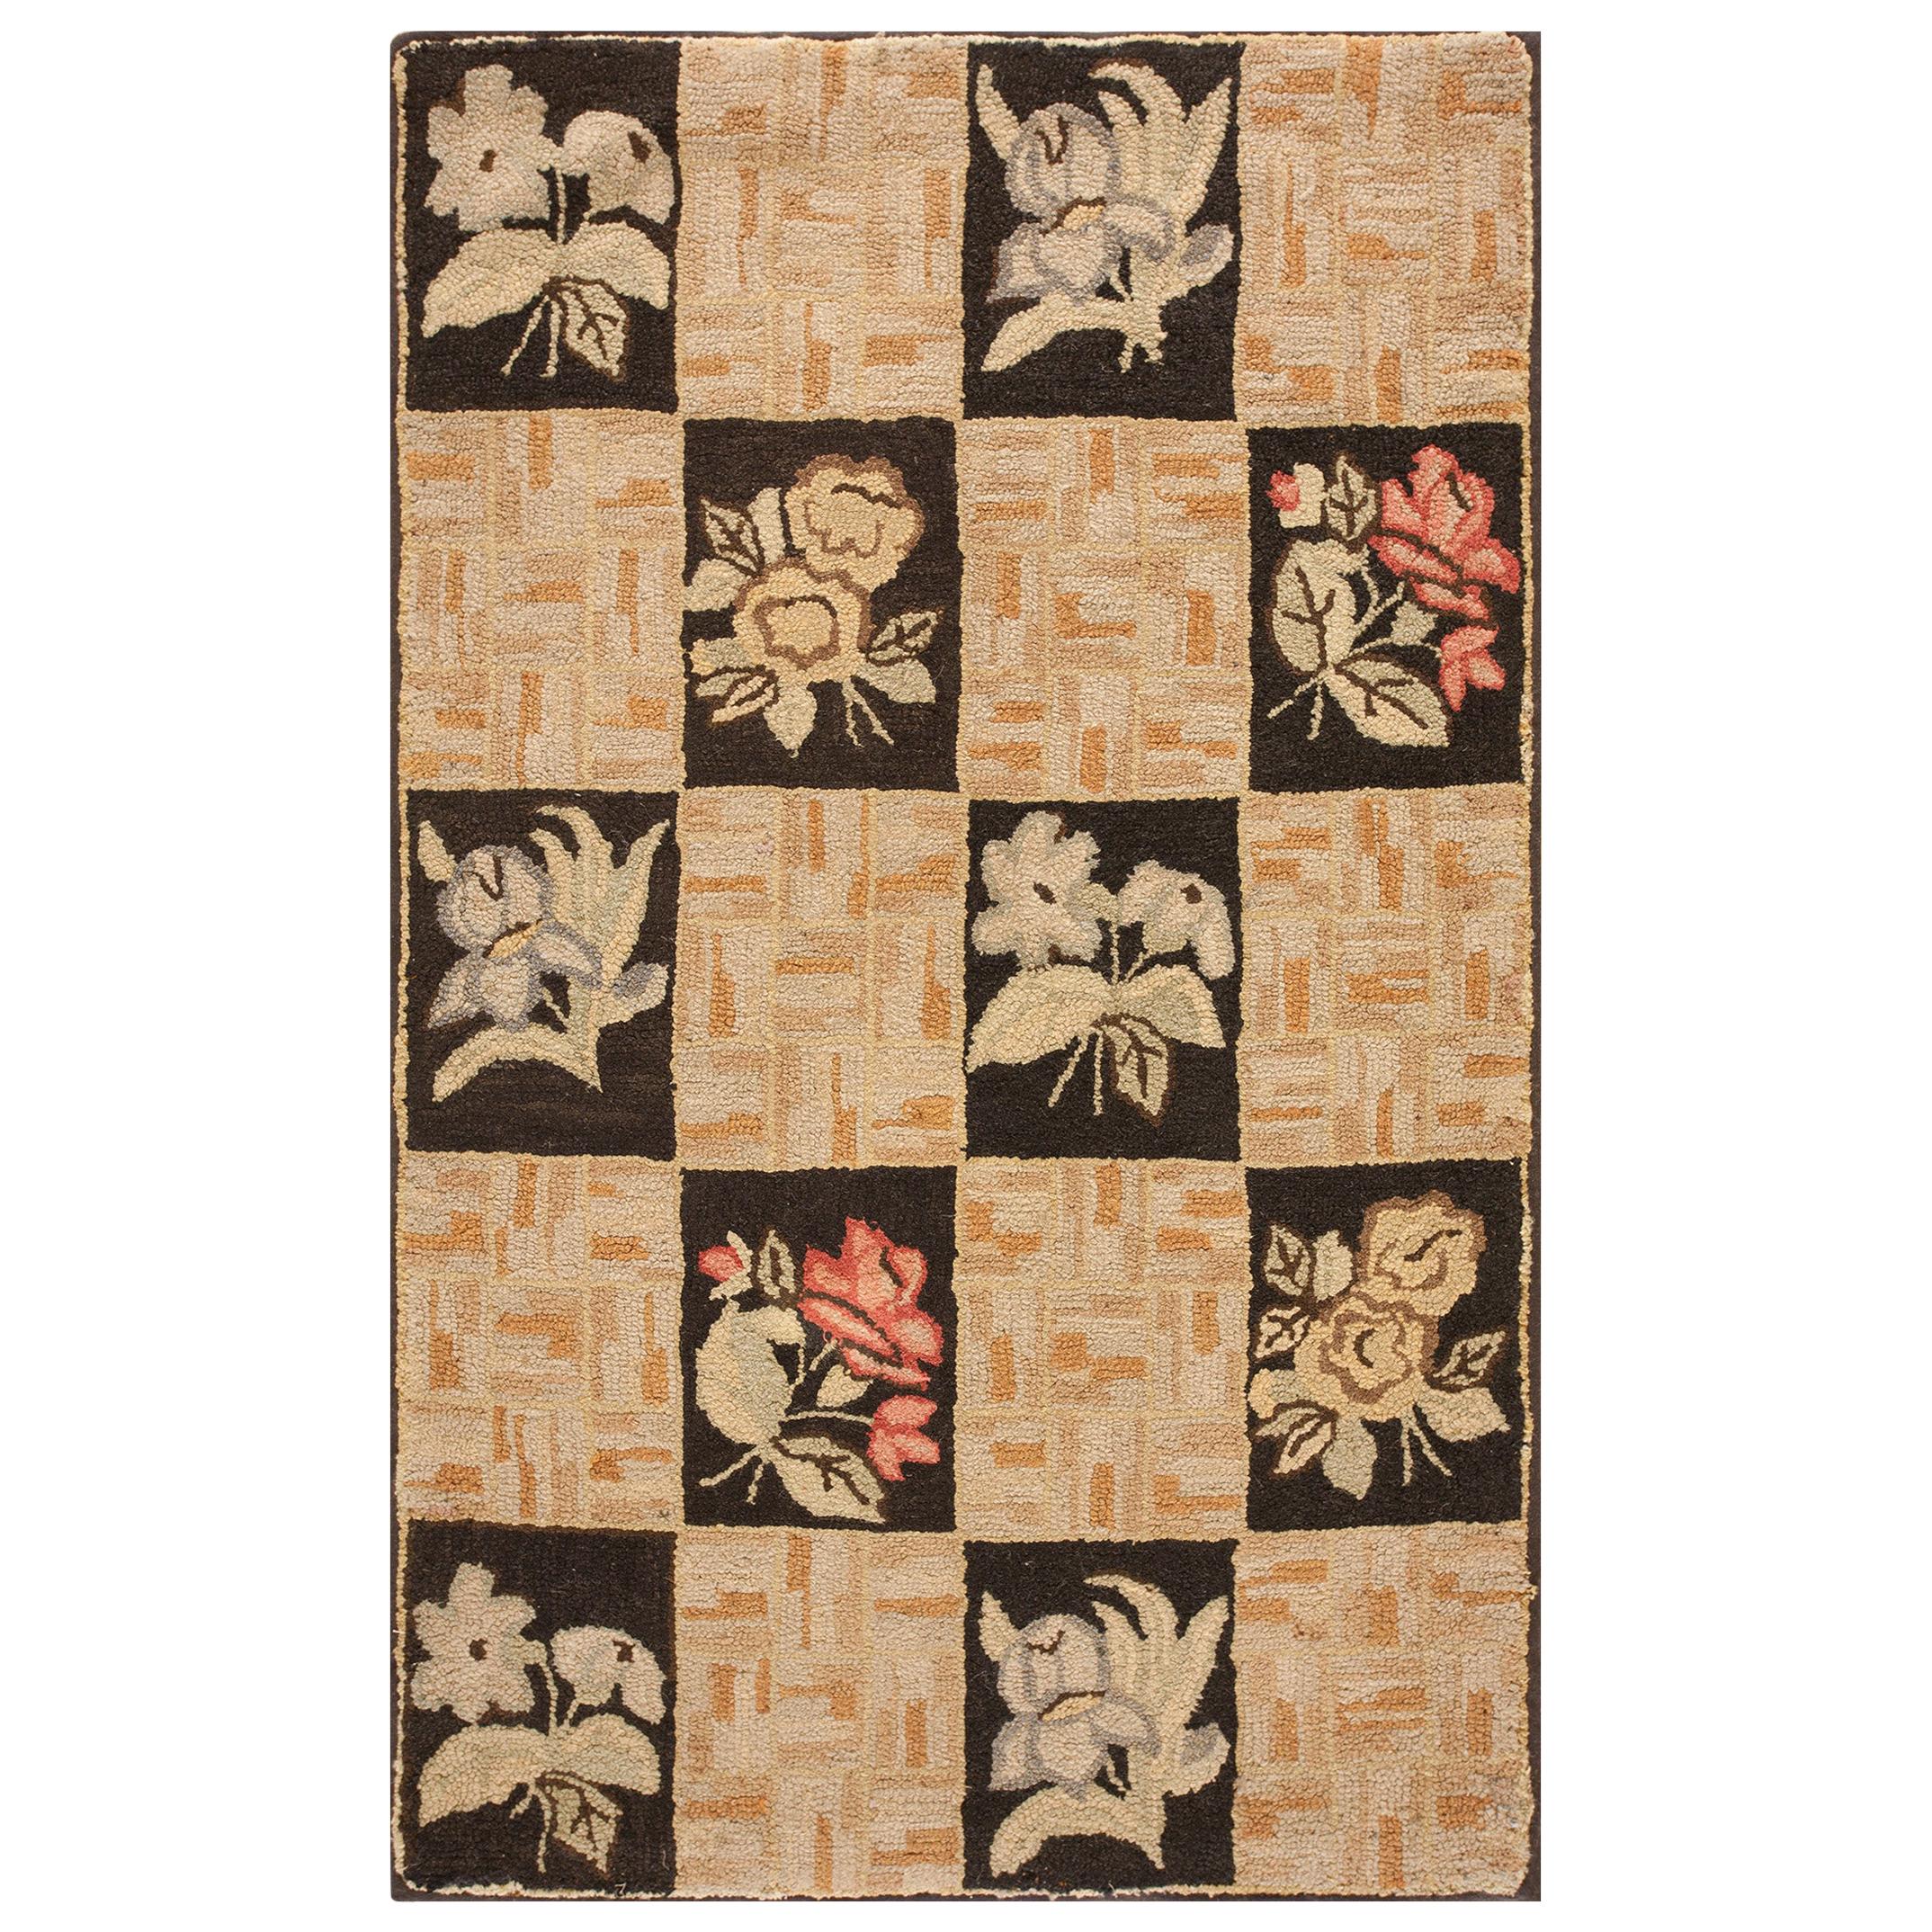 1930s American Hooked Rug ( 3' x 5' - 91 x 152 )